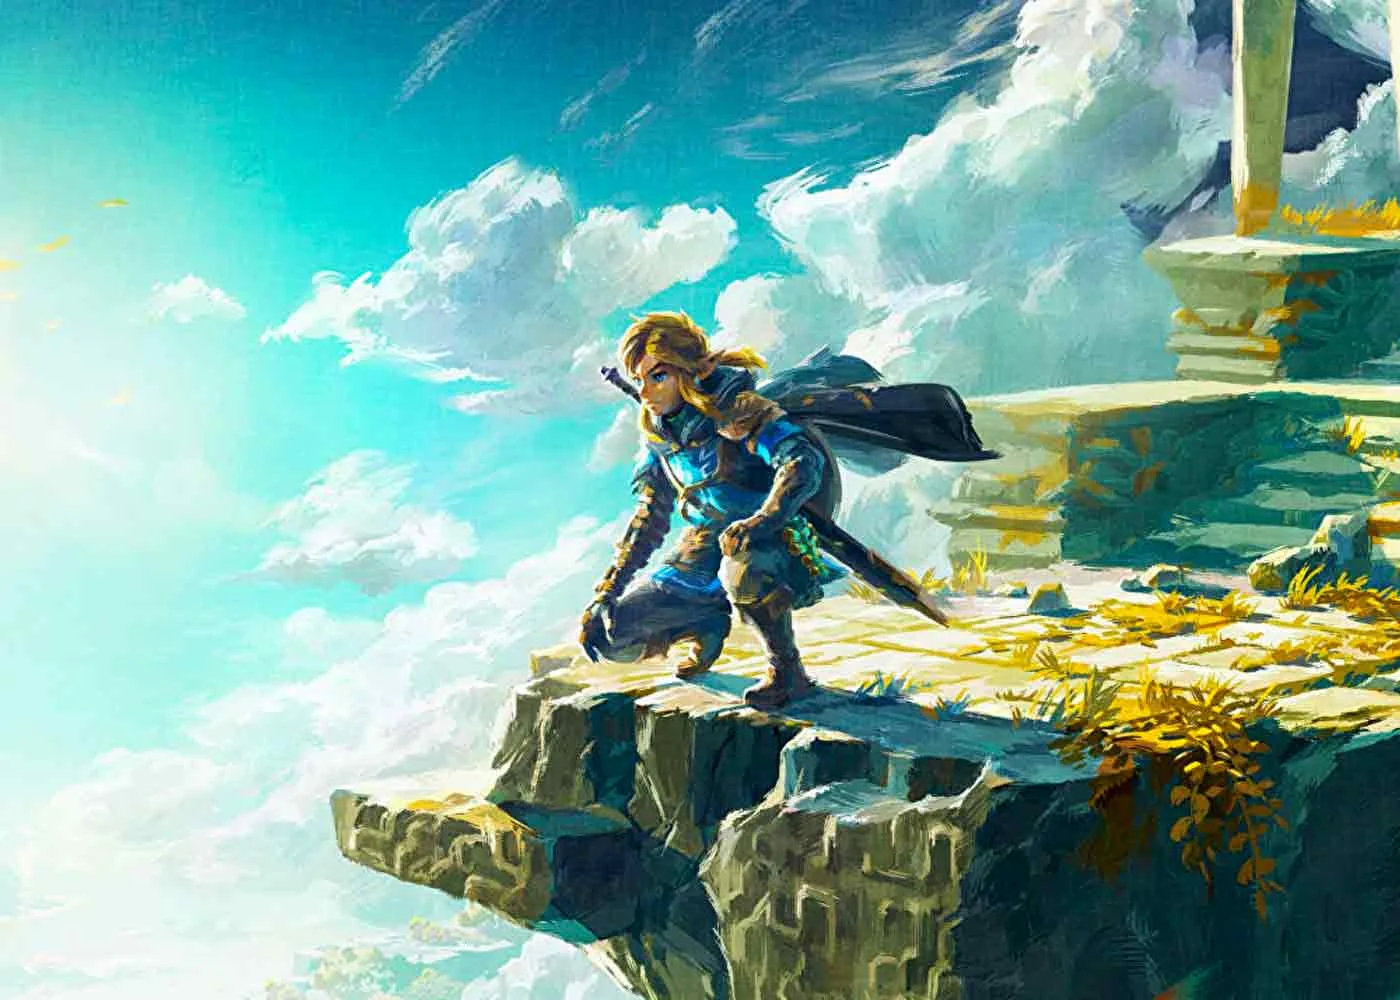 The announcement of the continuation of The Legend of Zelda: Breath of the Wild